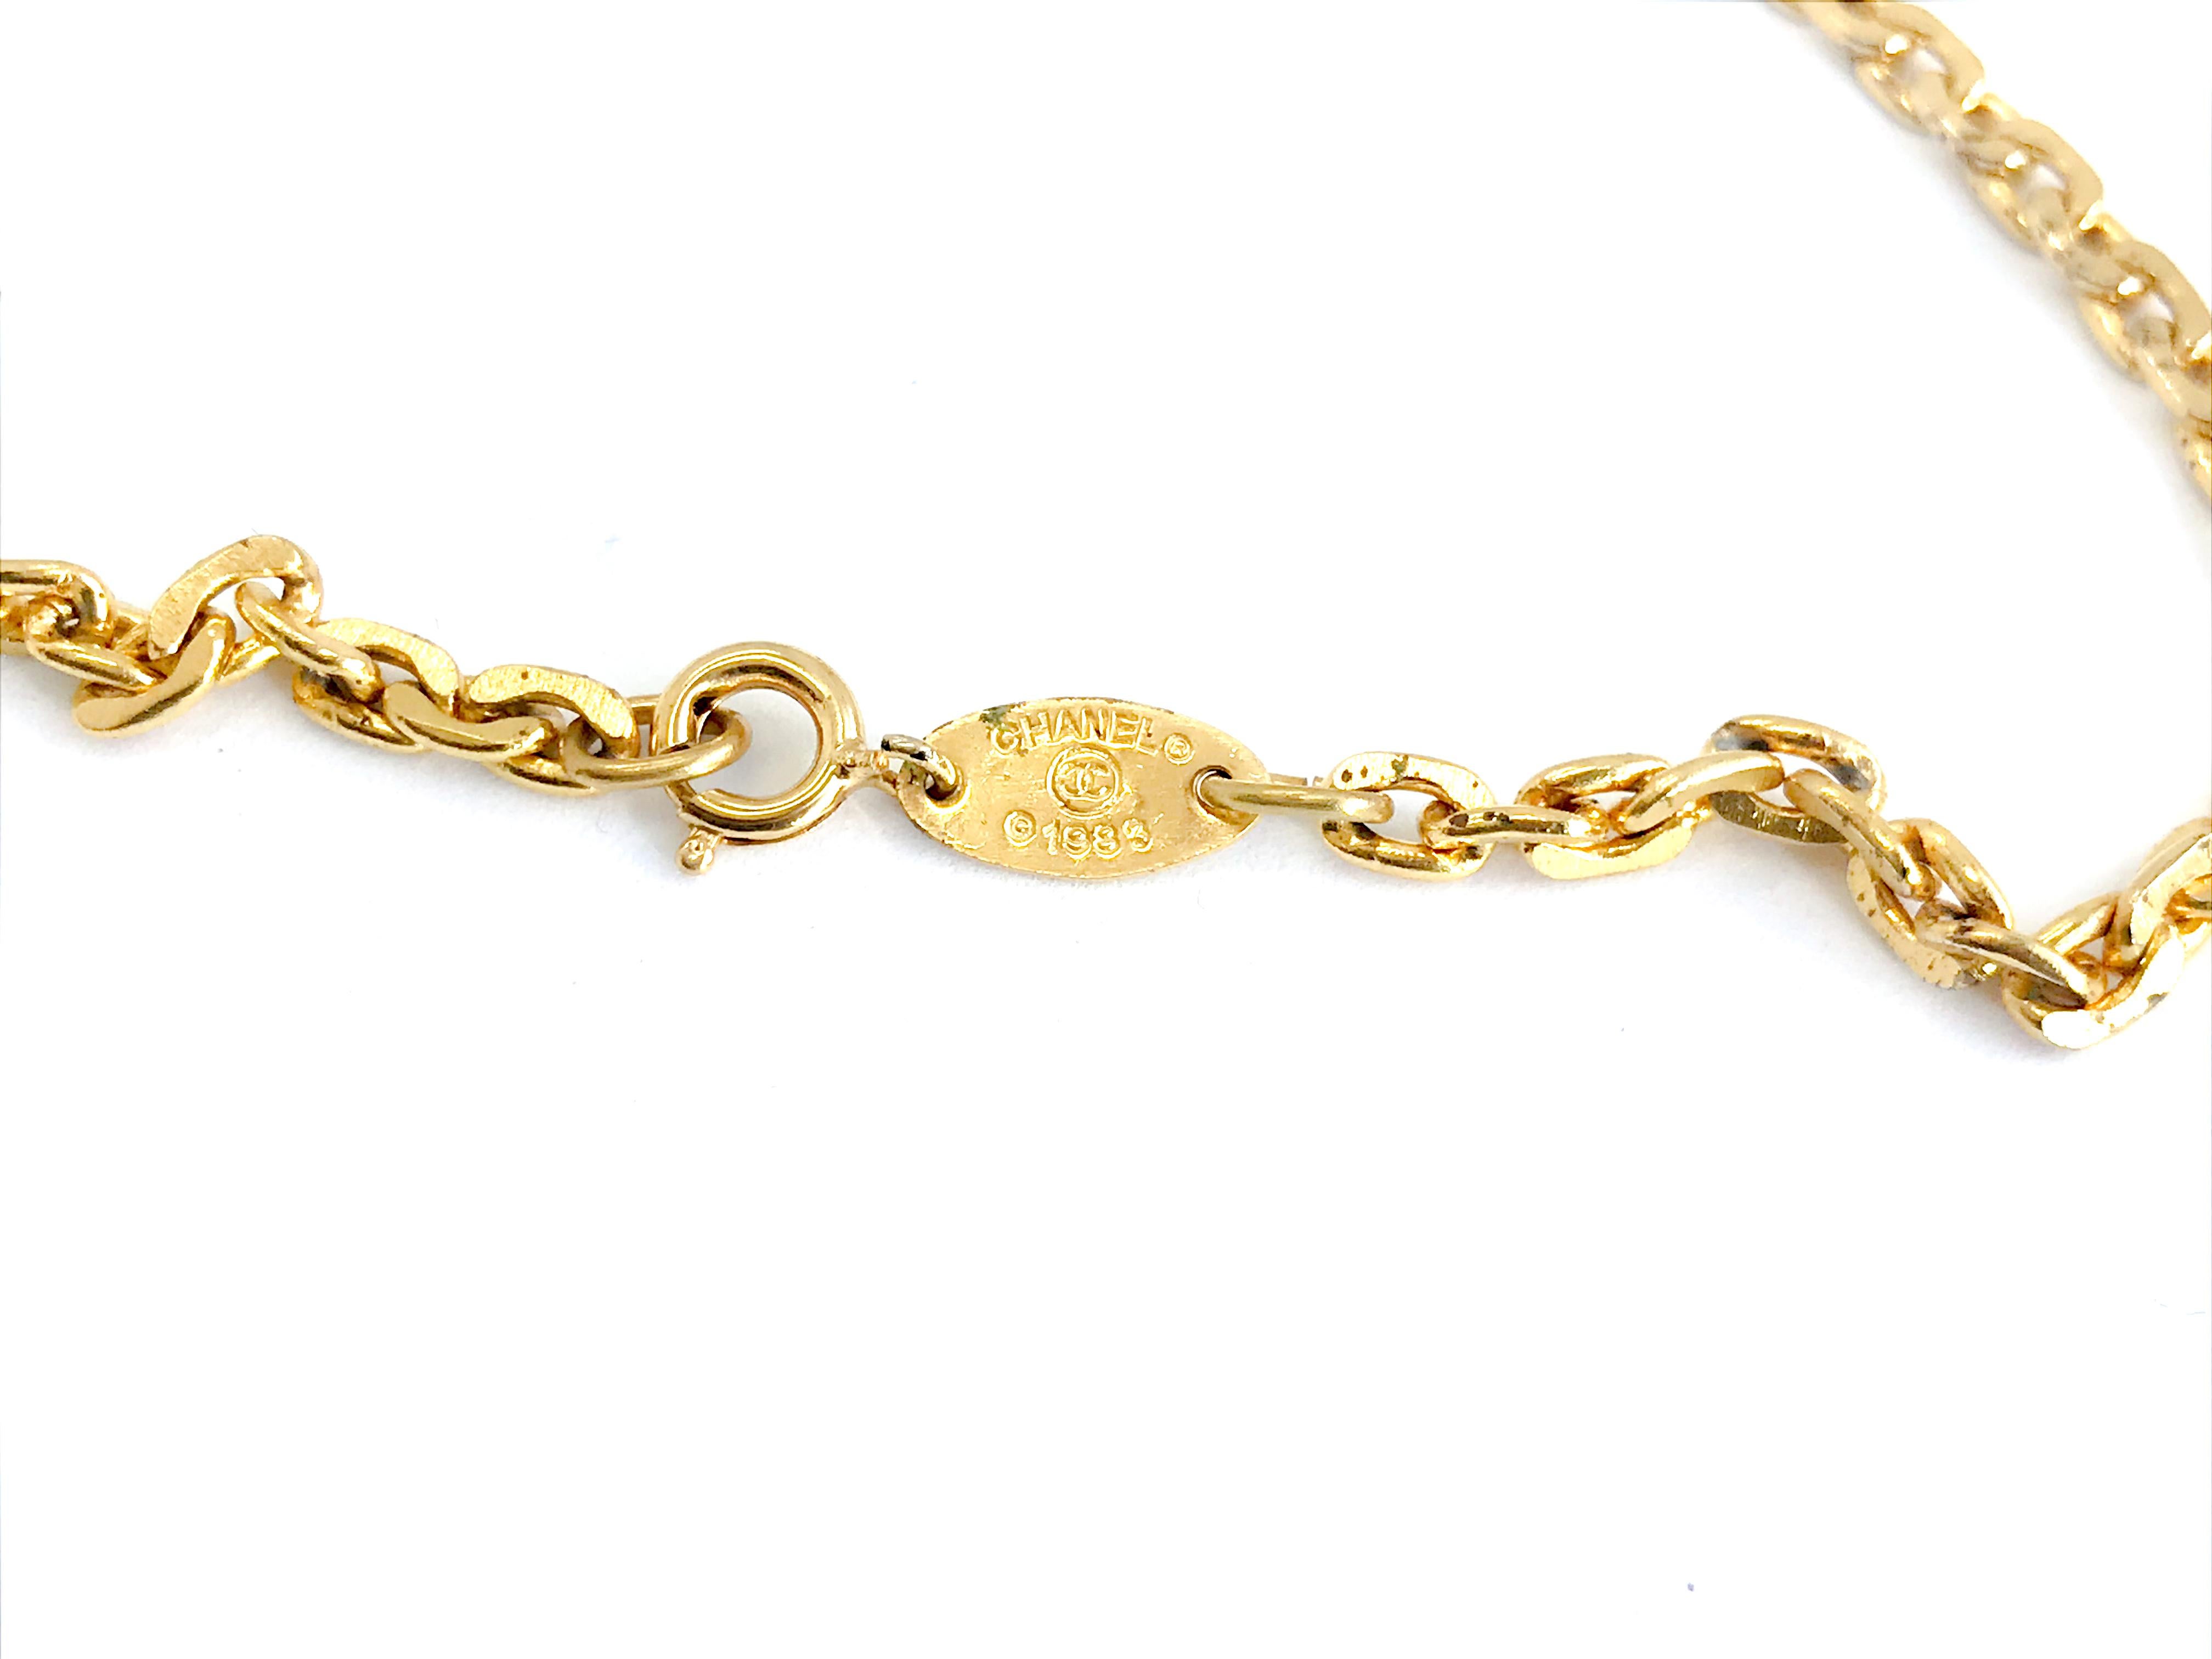 Chanel 1980s Delicate CC Gold Plated Necklace.  Stamped Chanel 1983 on a hang tag on the chain.  Chanel made a small range of delicate CC necklaces in the early 80s which are really simple, pretty and uncharacteristically delicate.

Great condition